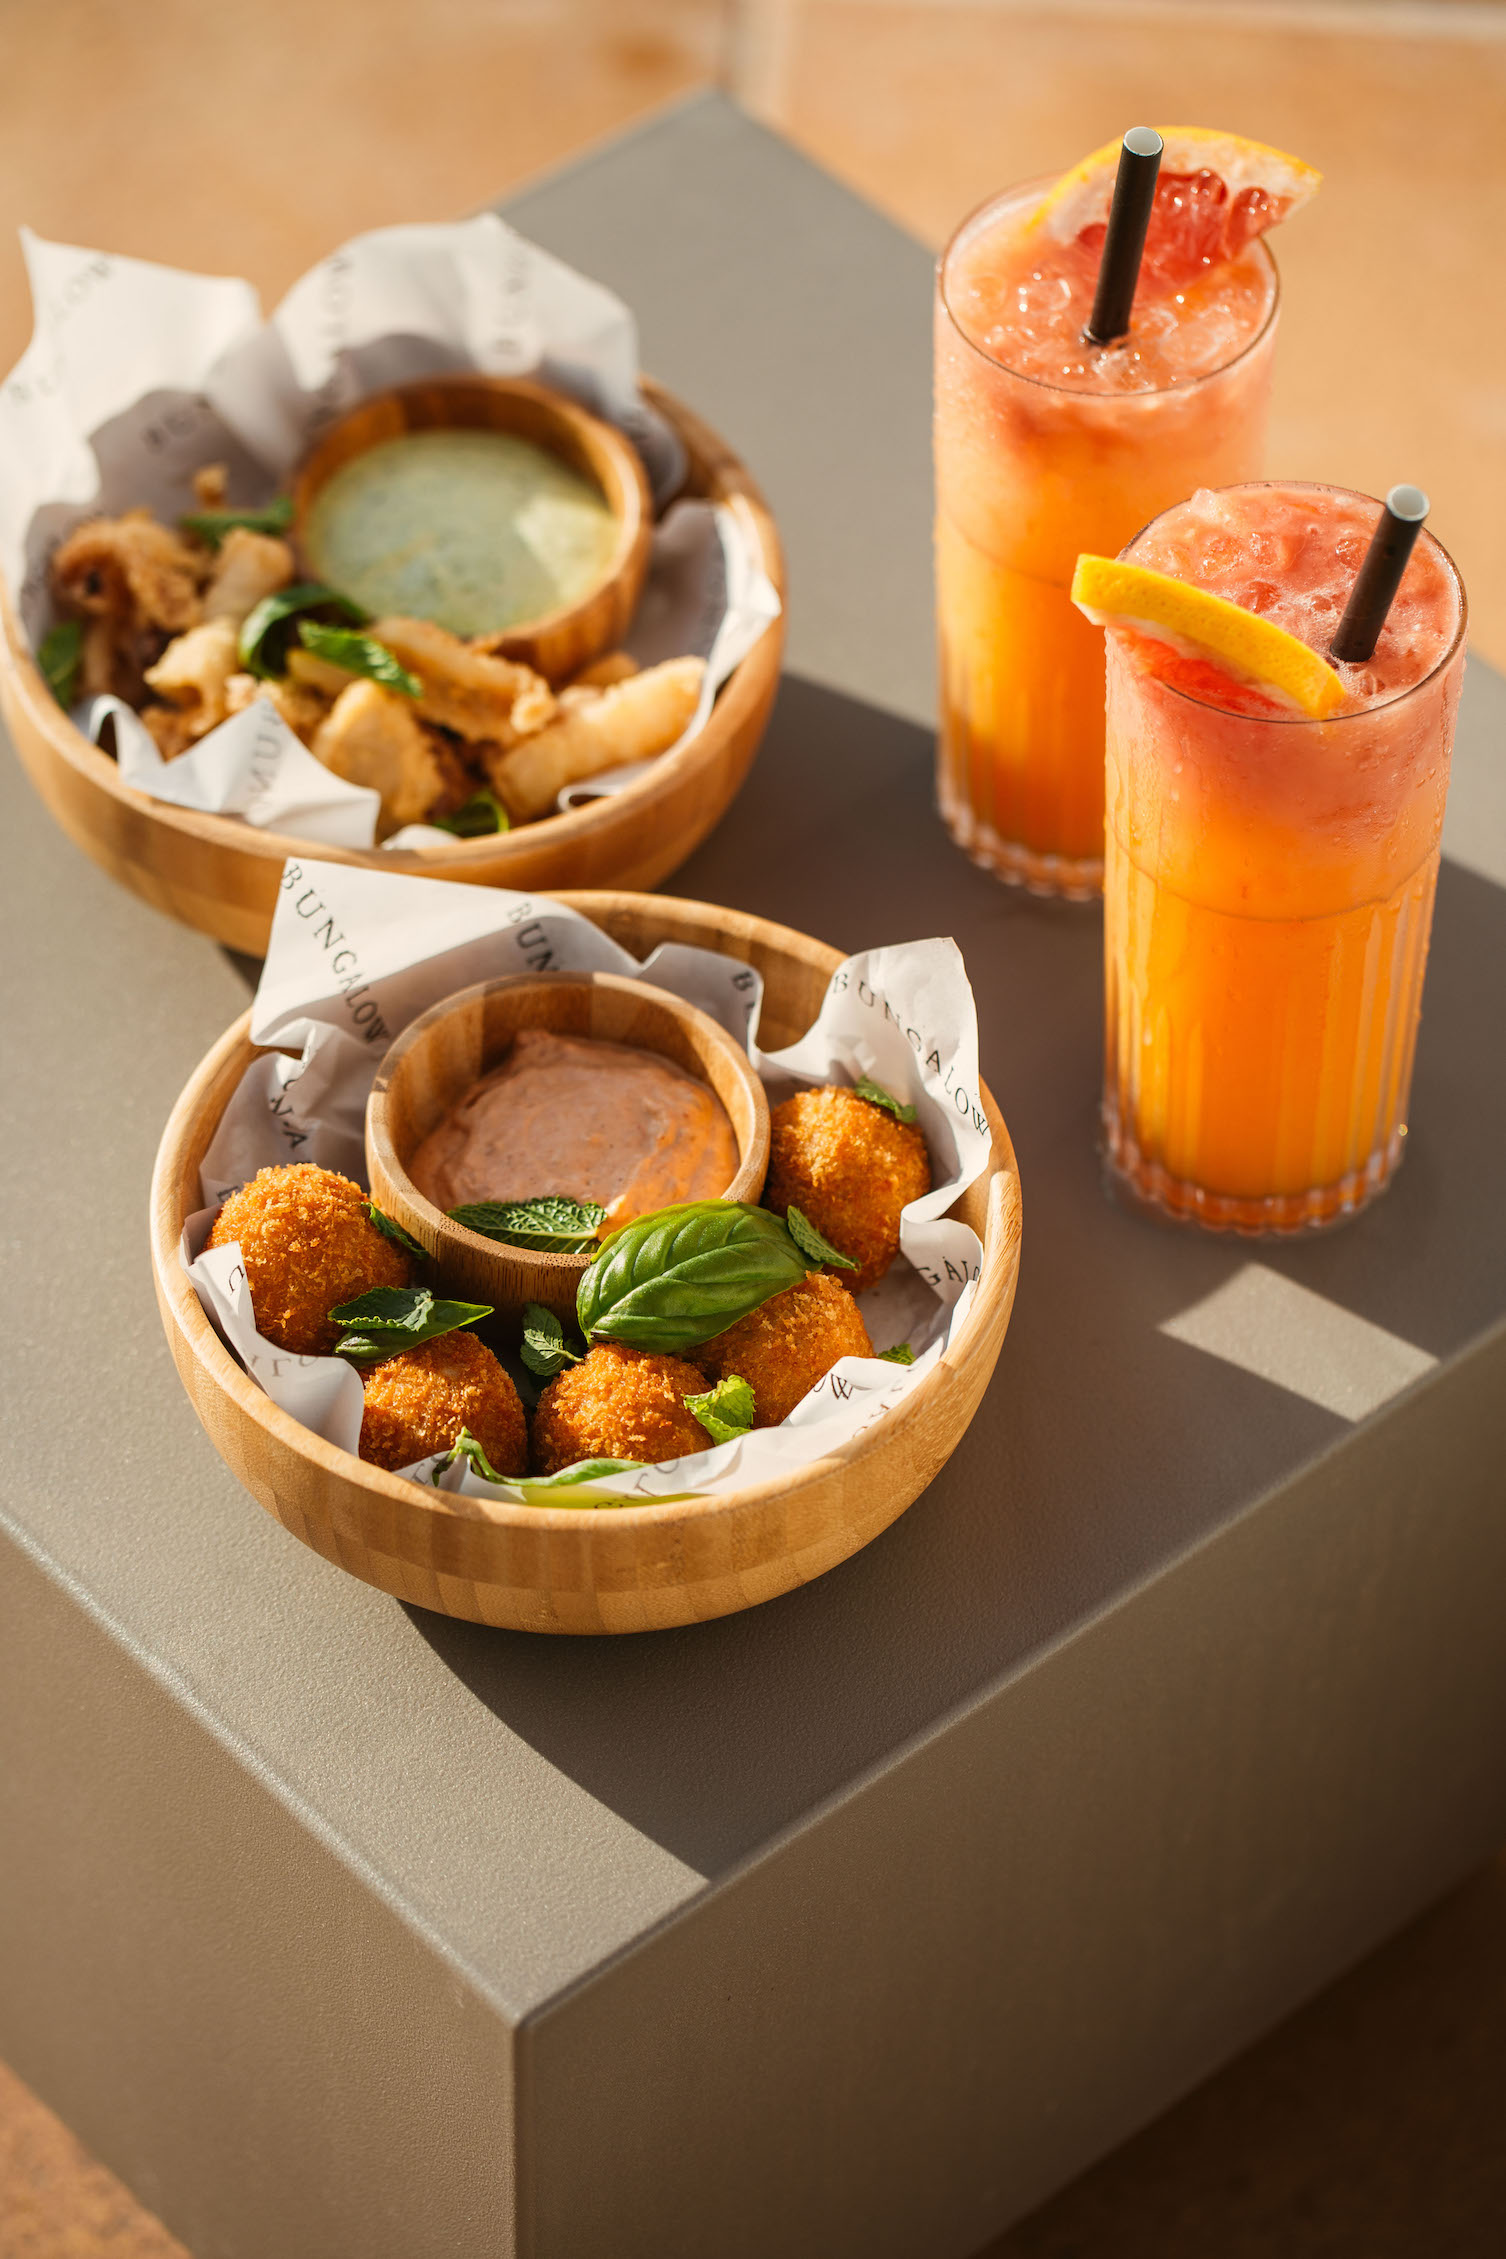 Appetizers with dipping sauces in wooden bowls with orange cocktails sitting on a grey square table